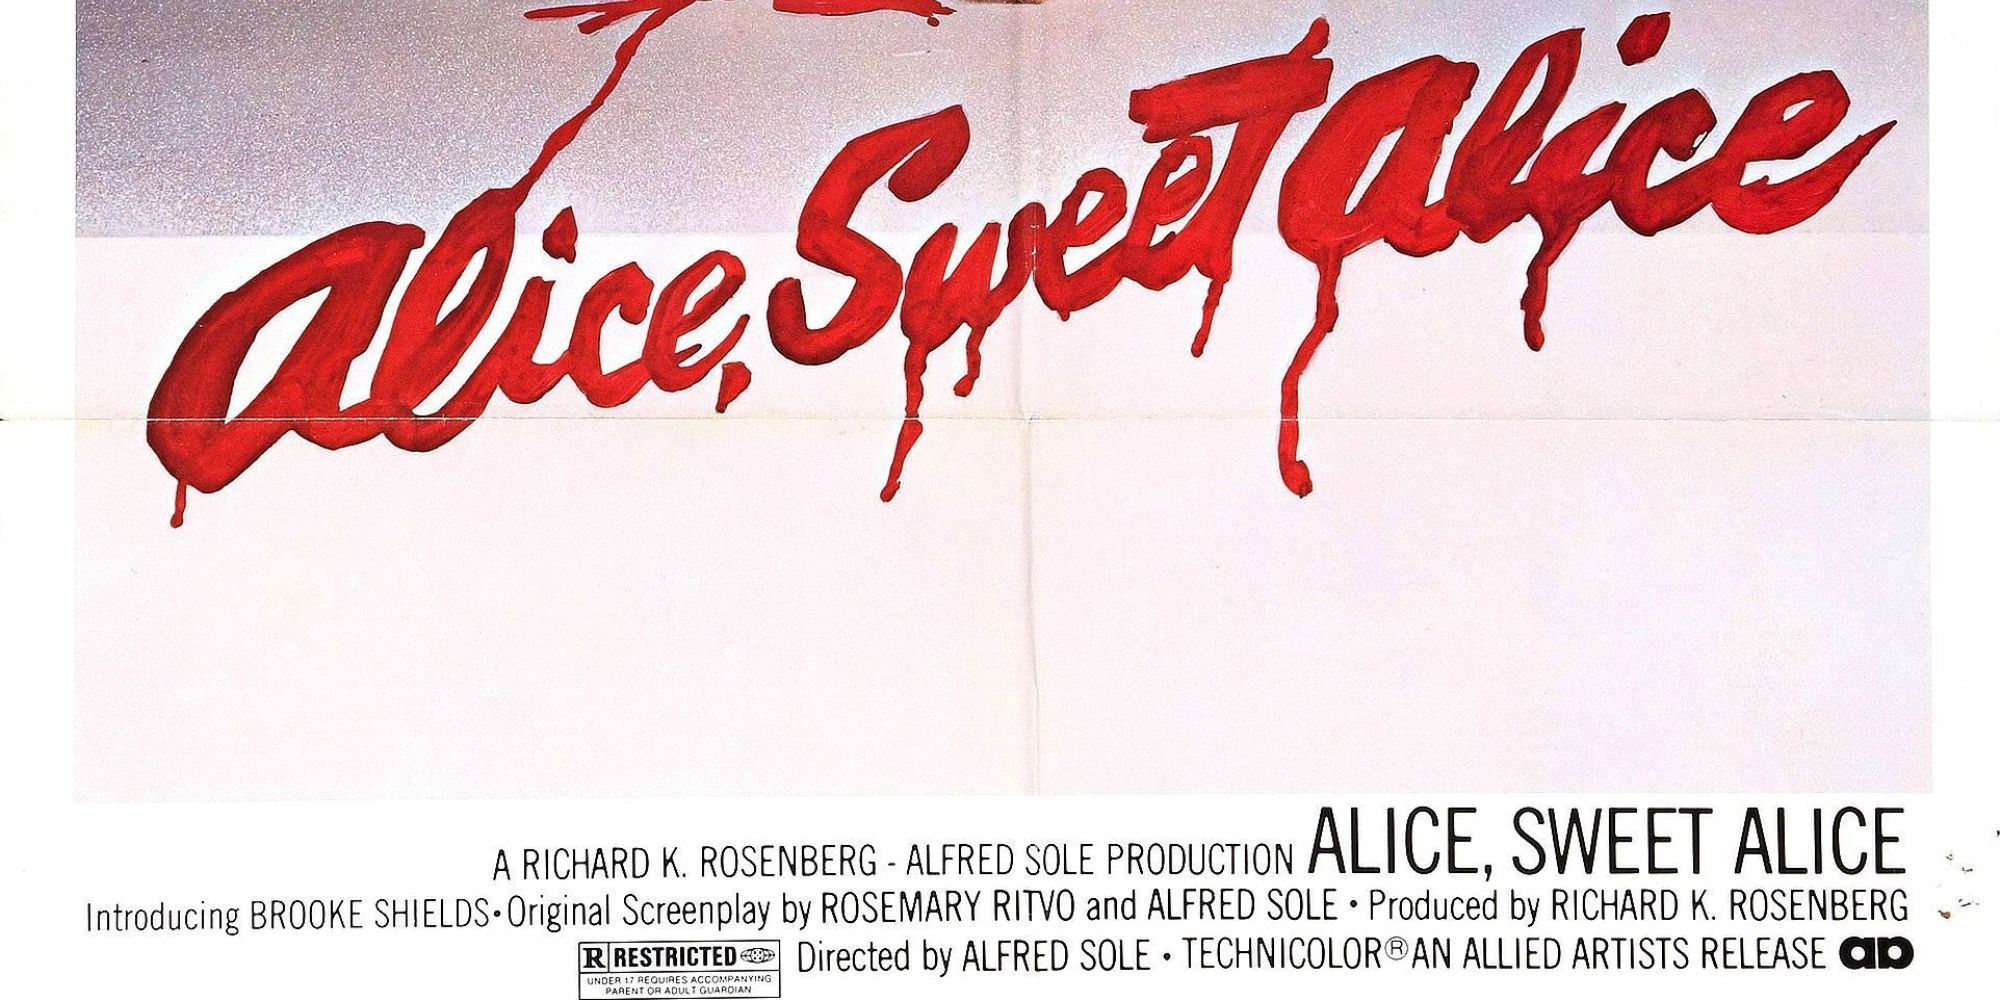 The theatrical poster for Alice, Sweet Alice featuring the title written in blood